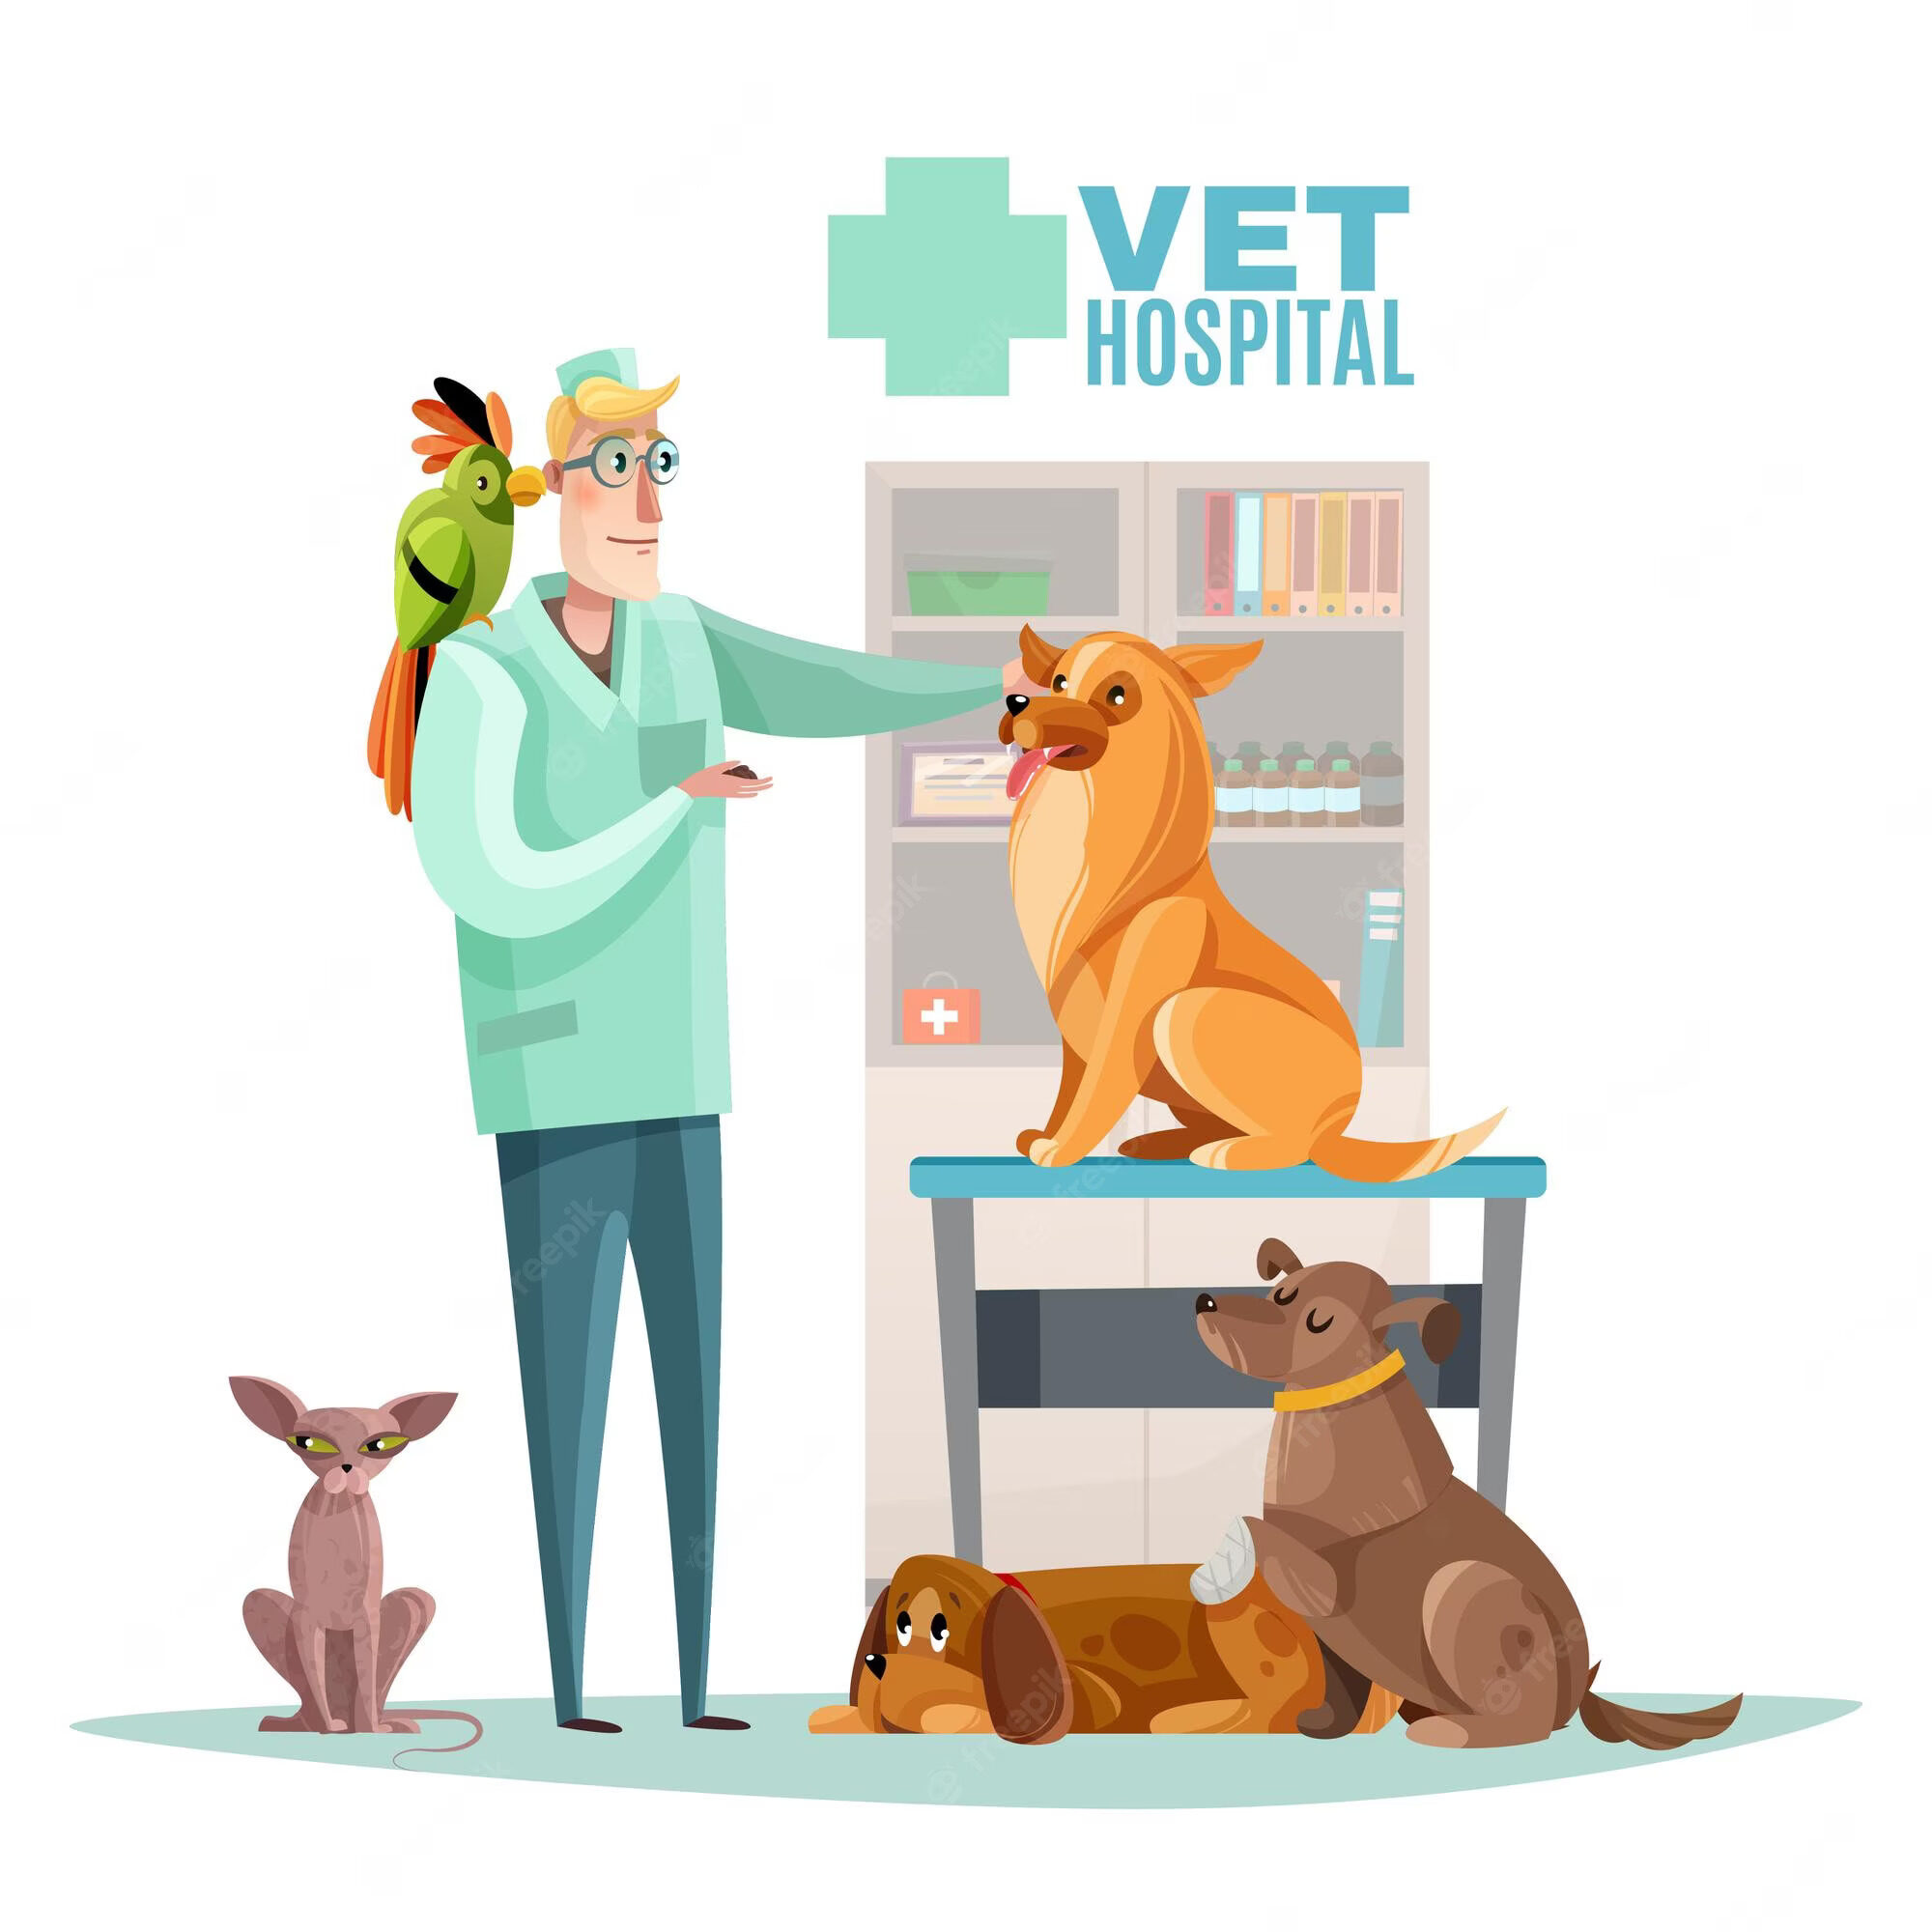 vet-hospital-composition-with-veterinarian-pets-interior-elements-flat_1284-26634